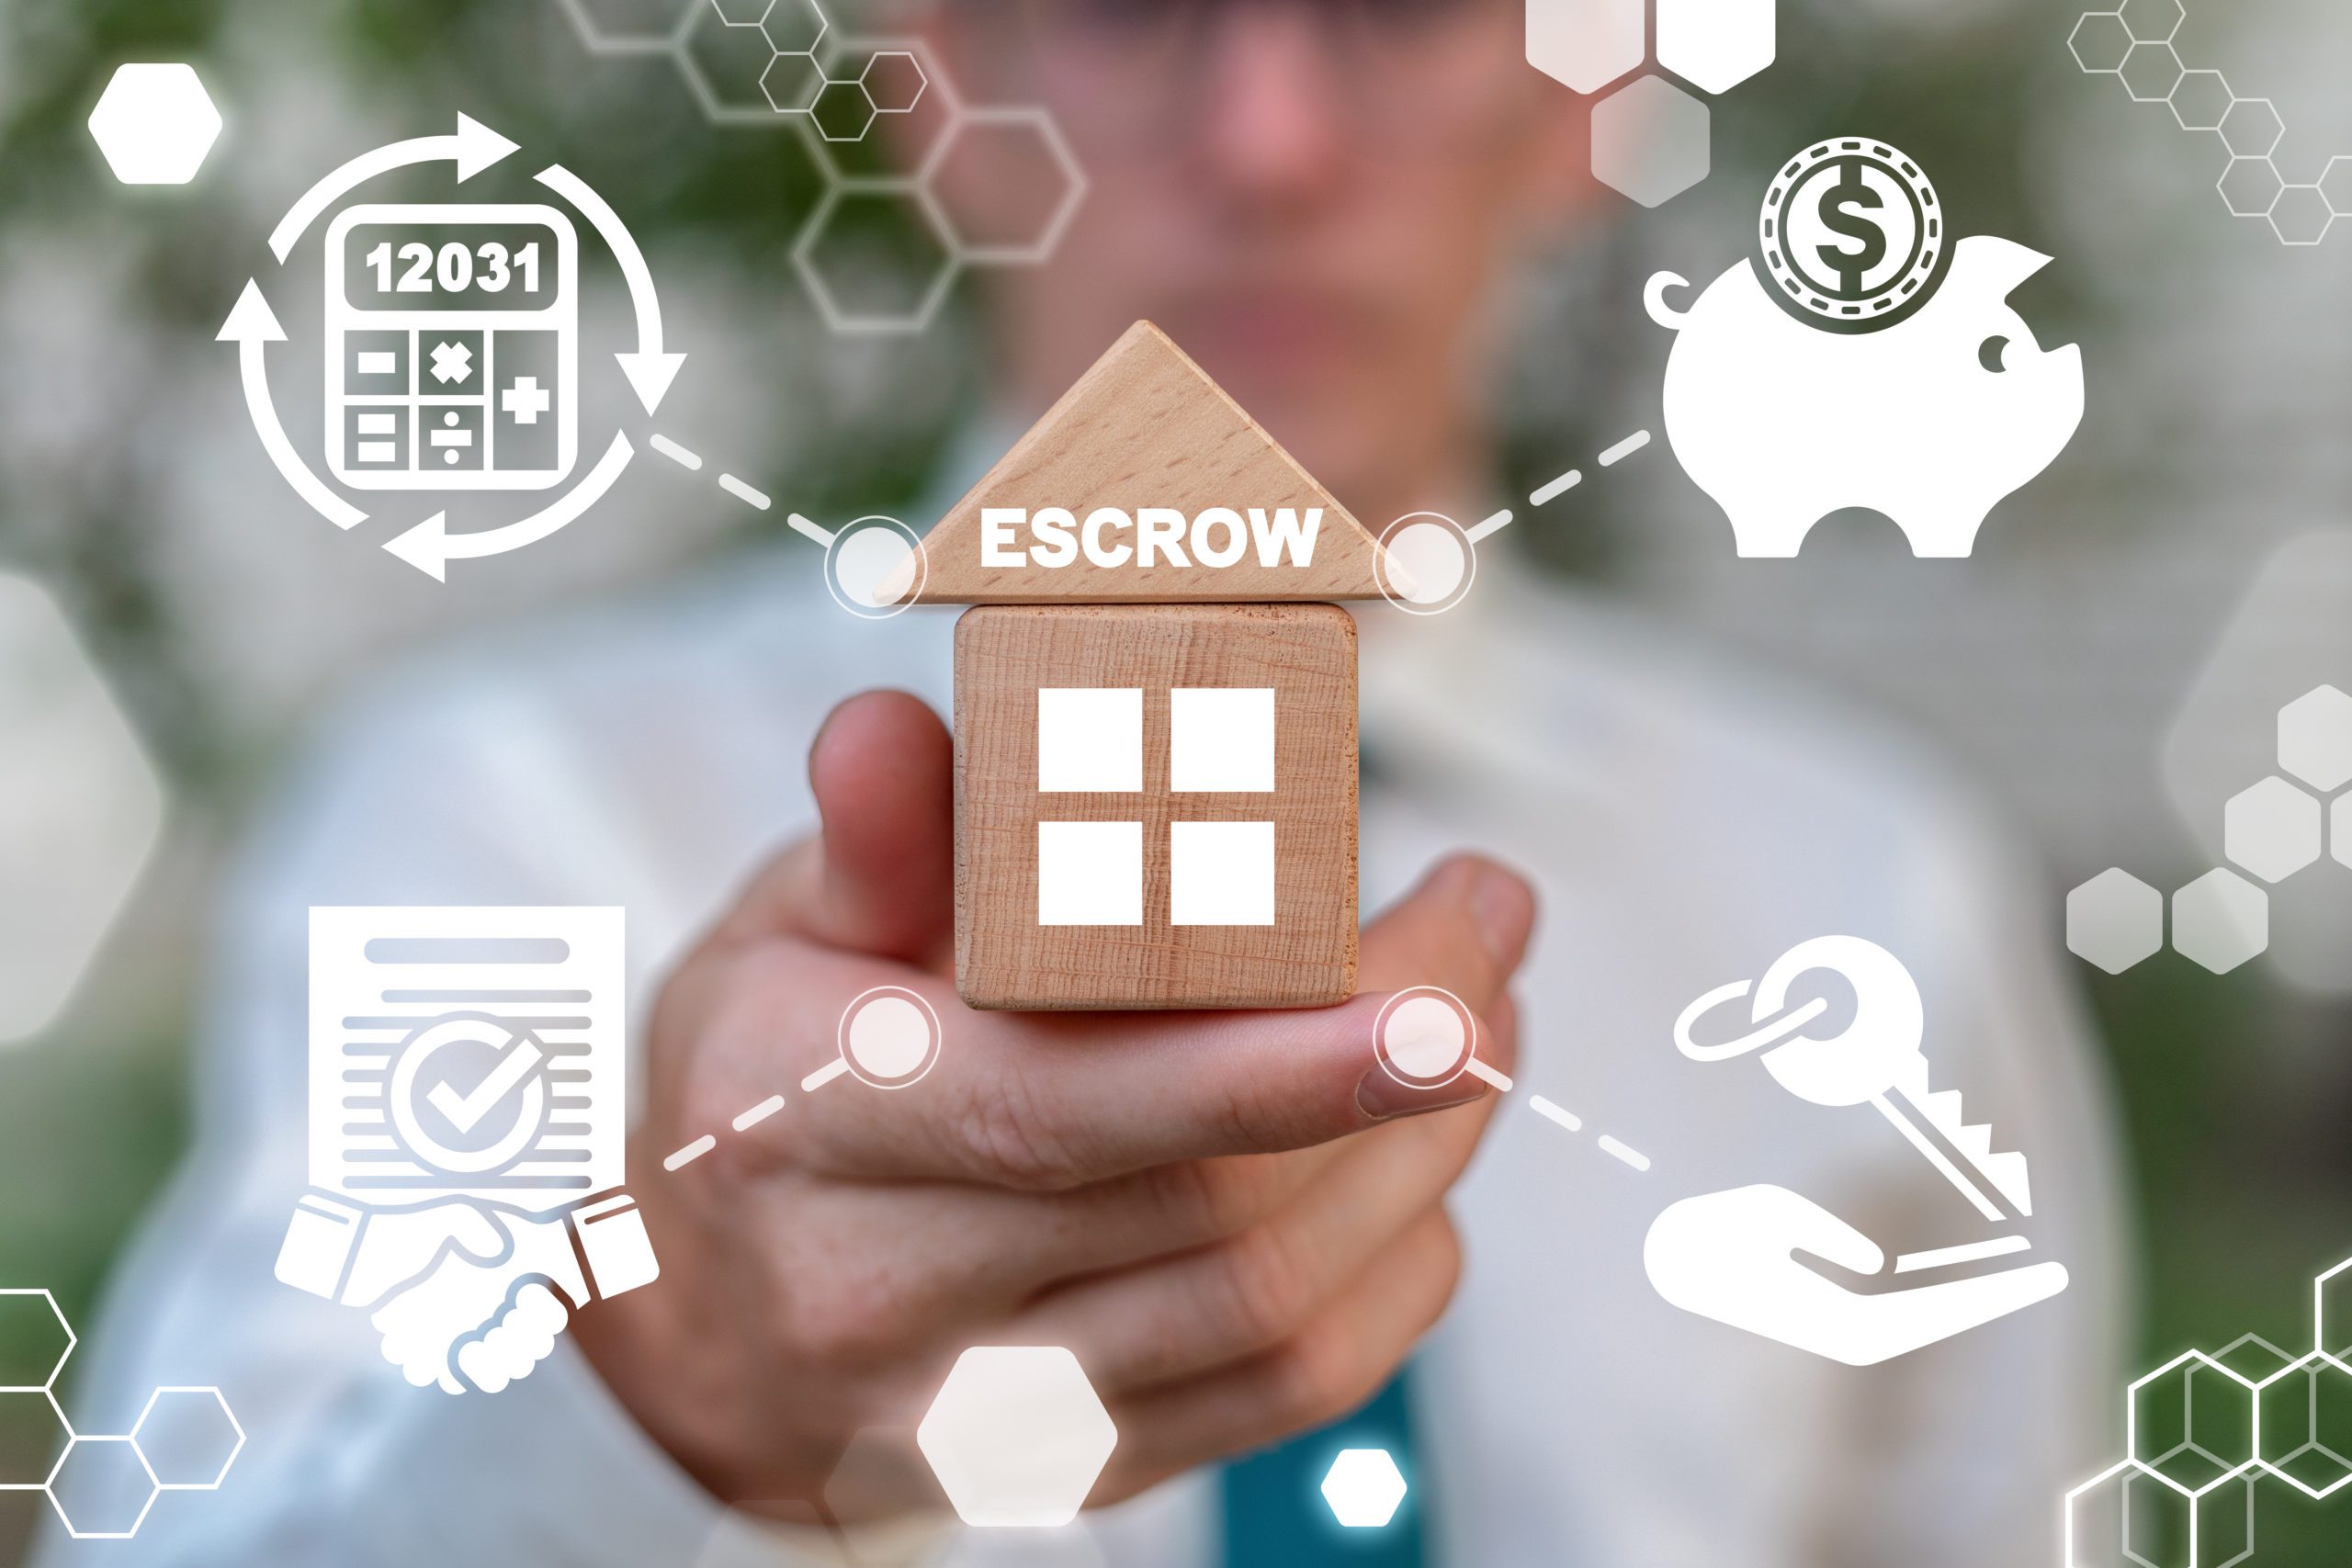 What is Escrow?